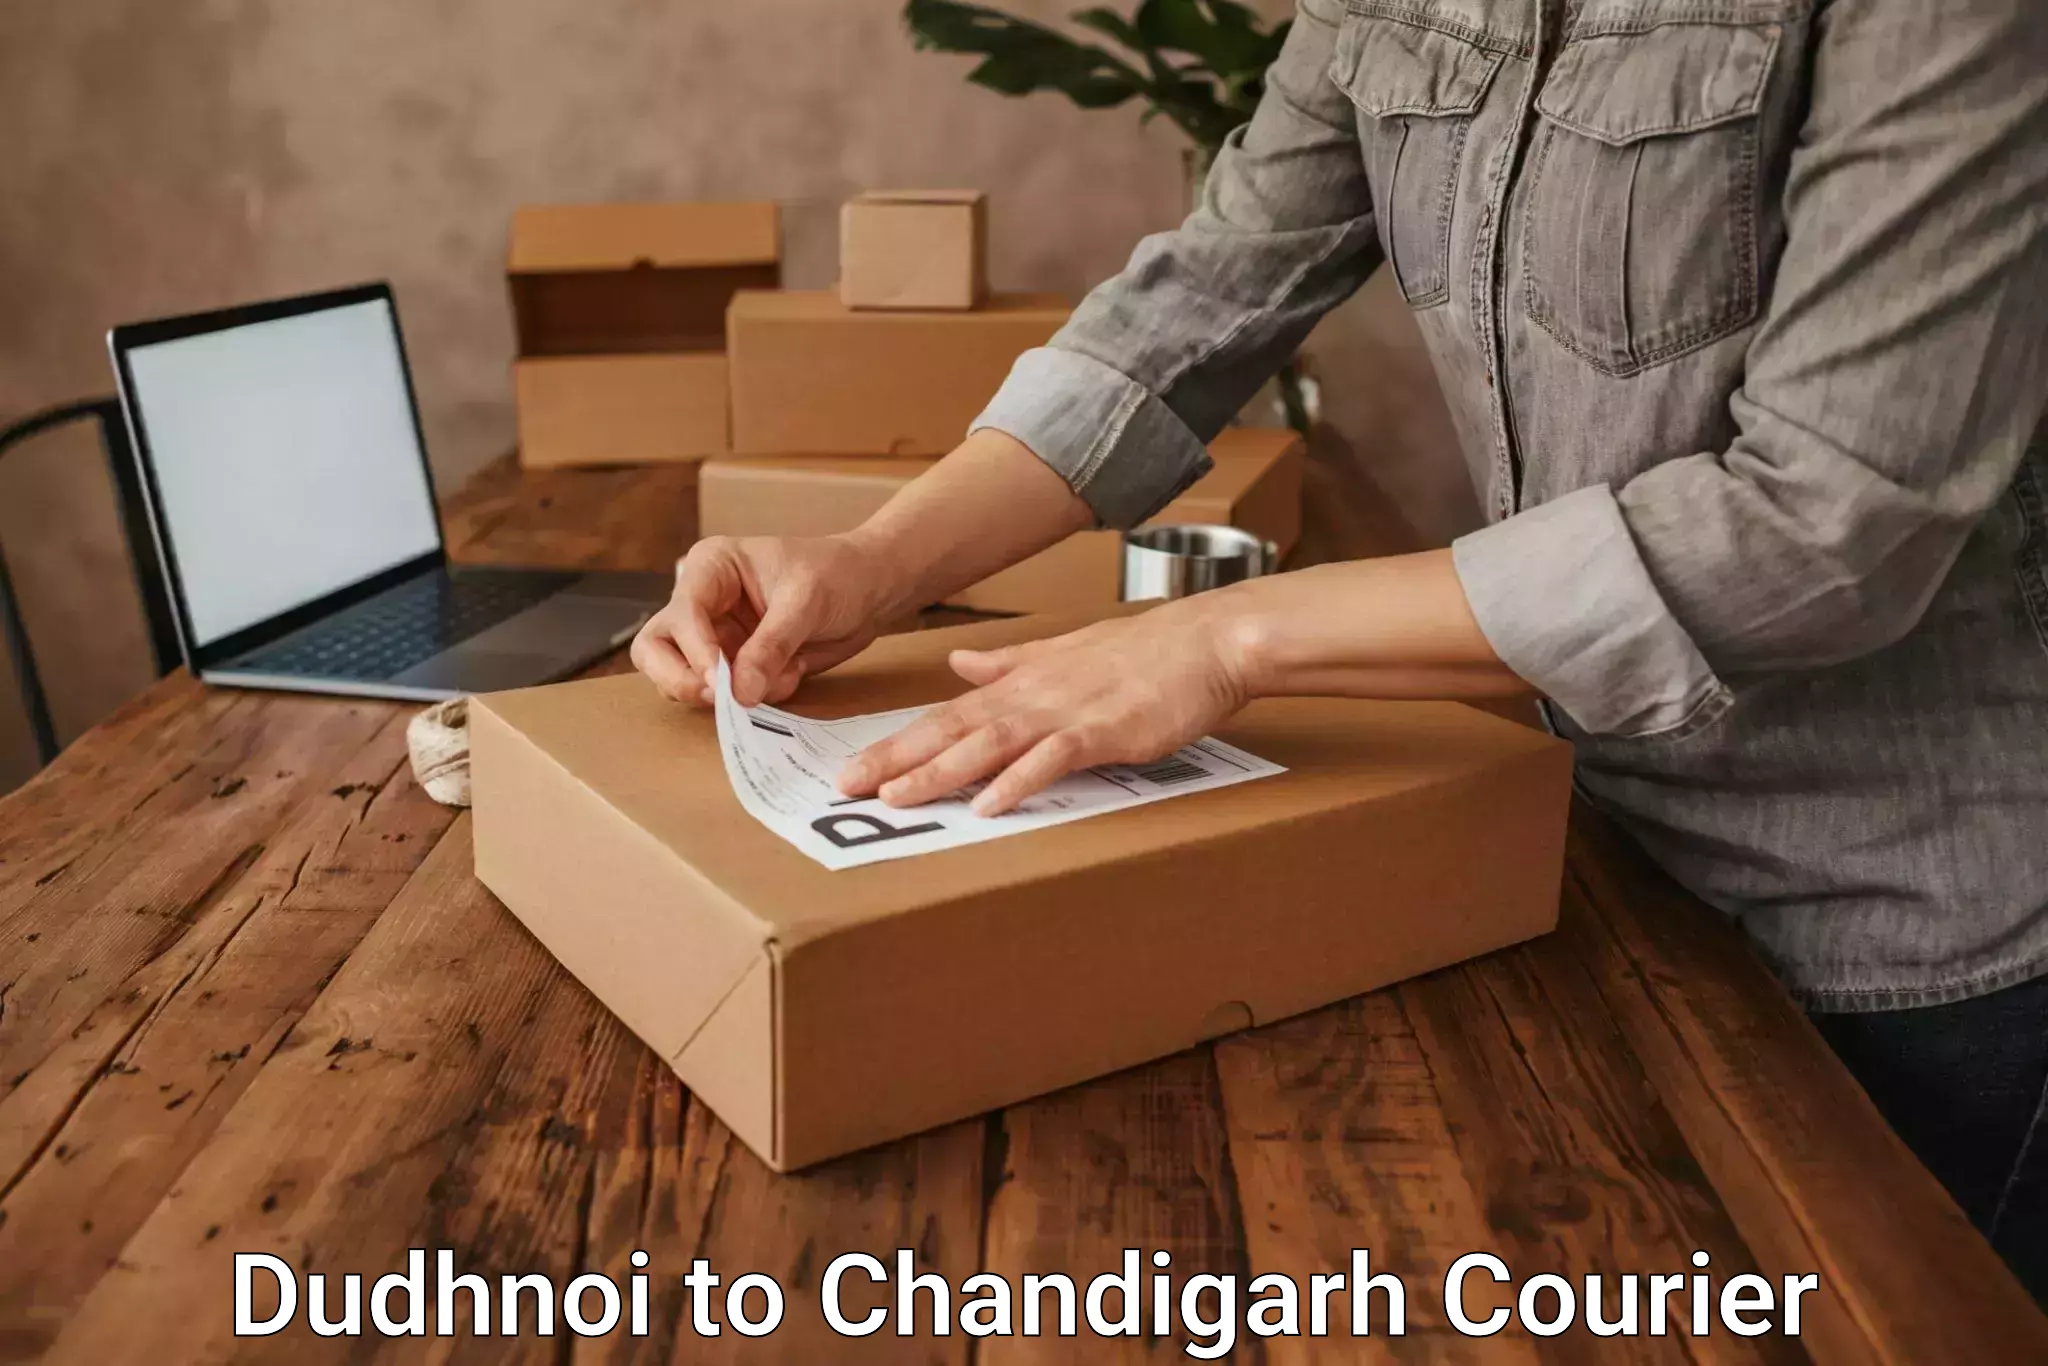 Delivery service partnership Dudhnoi to Chandigarh